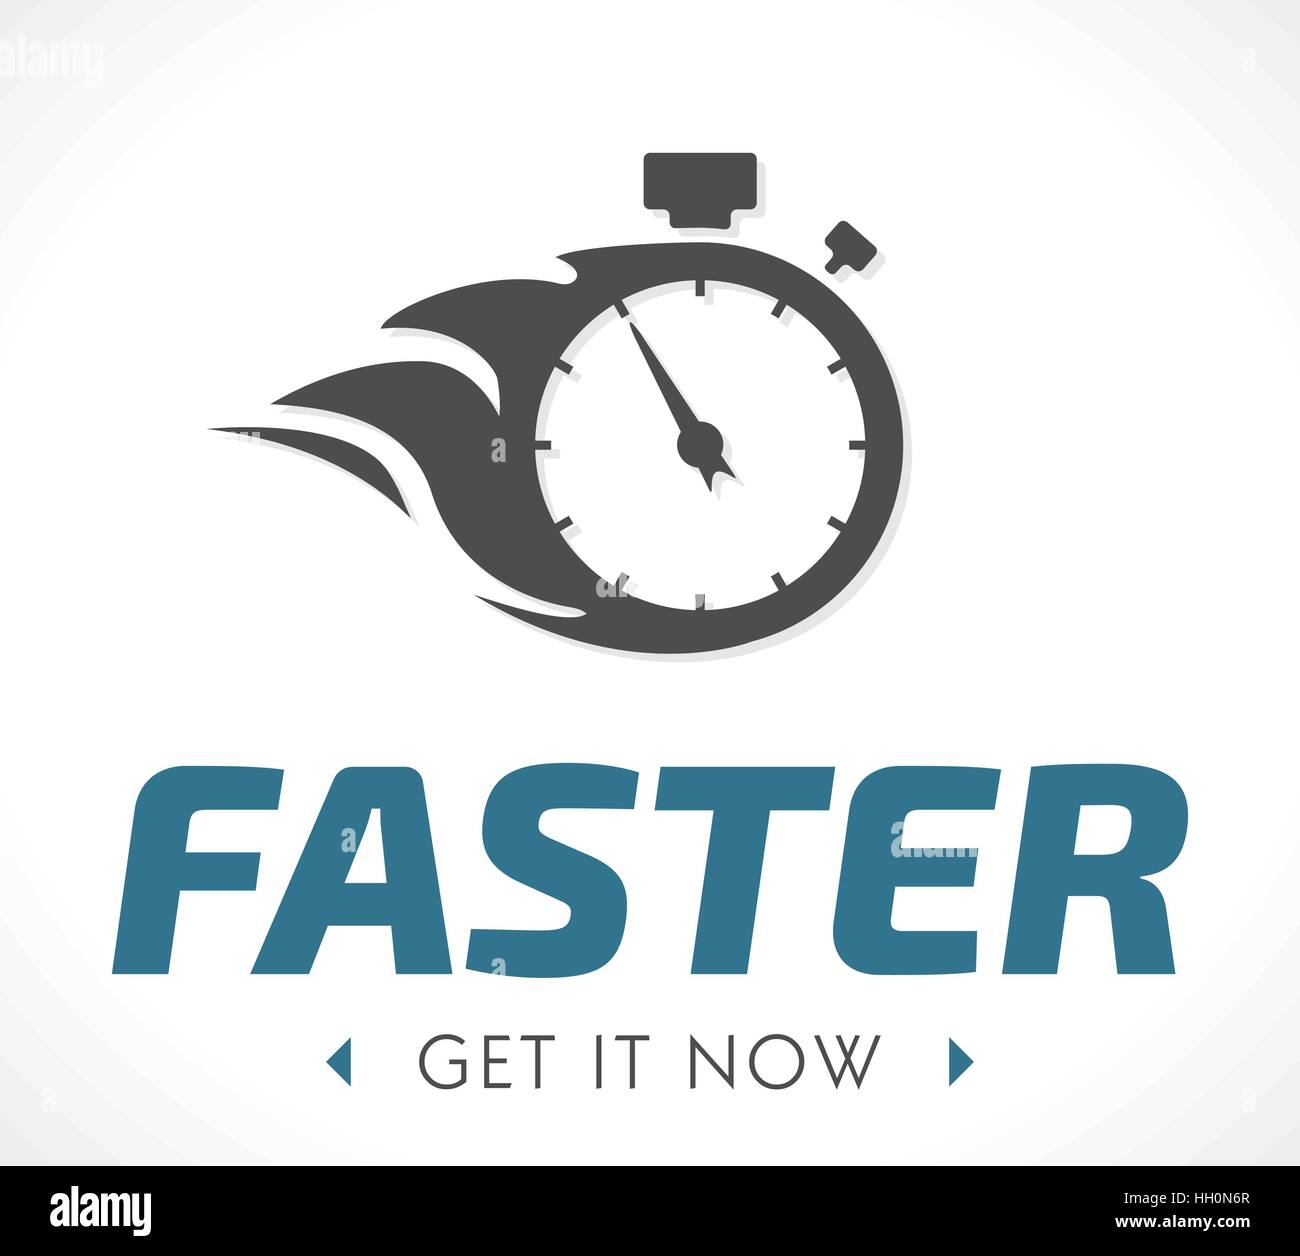 Faster logo - Business time concept Stock Vector